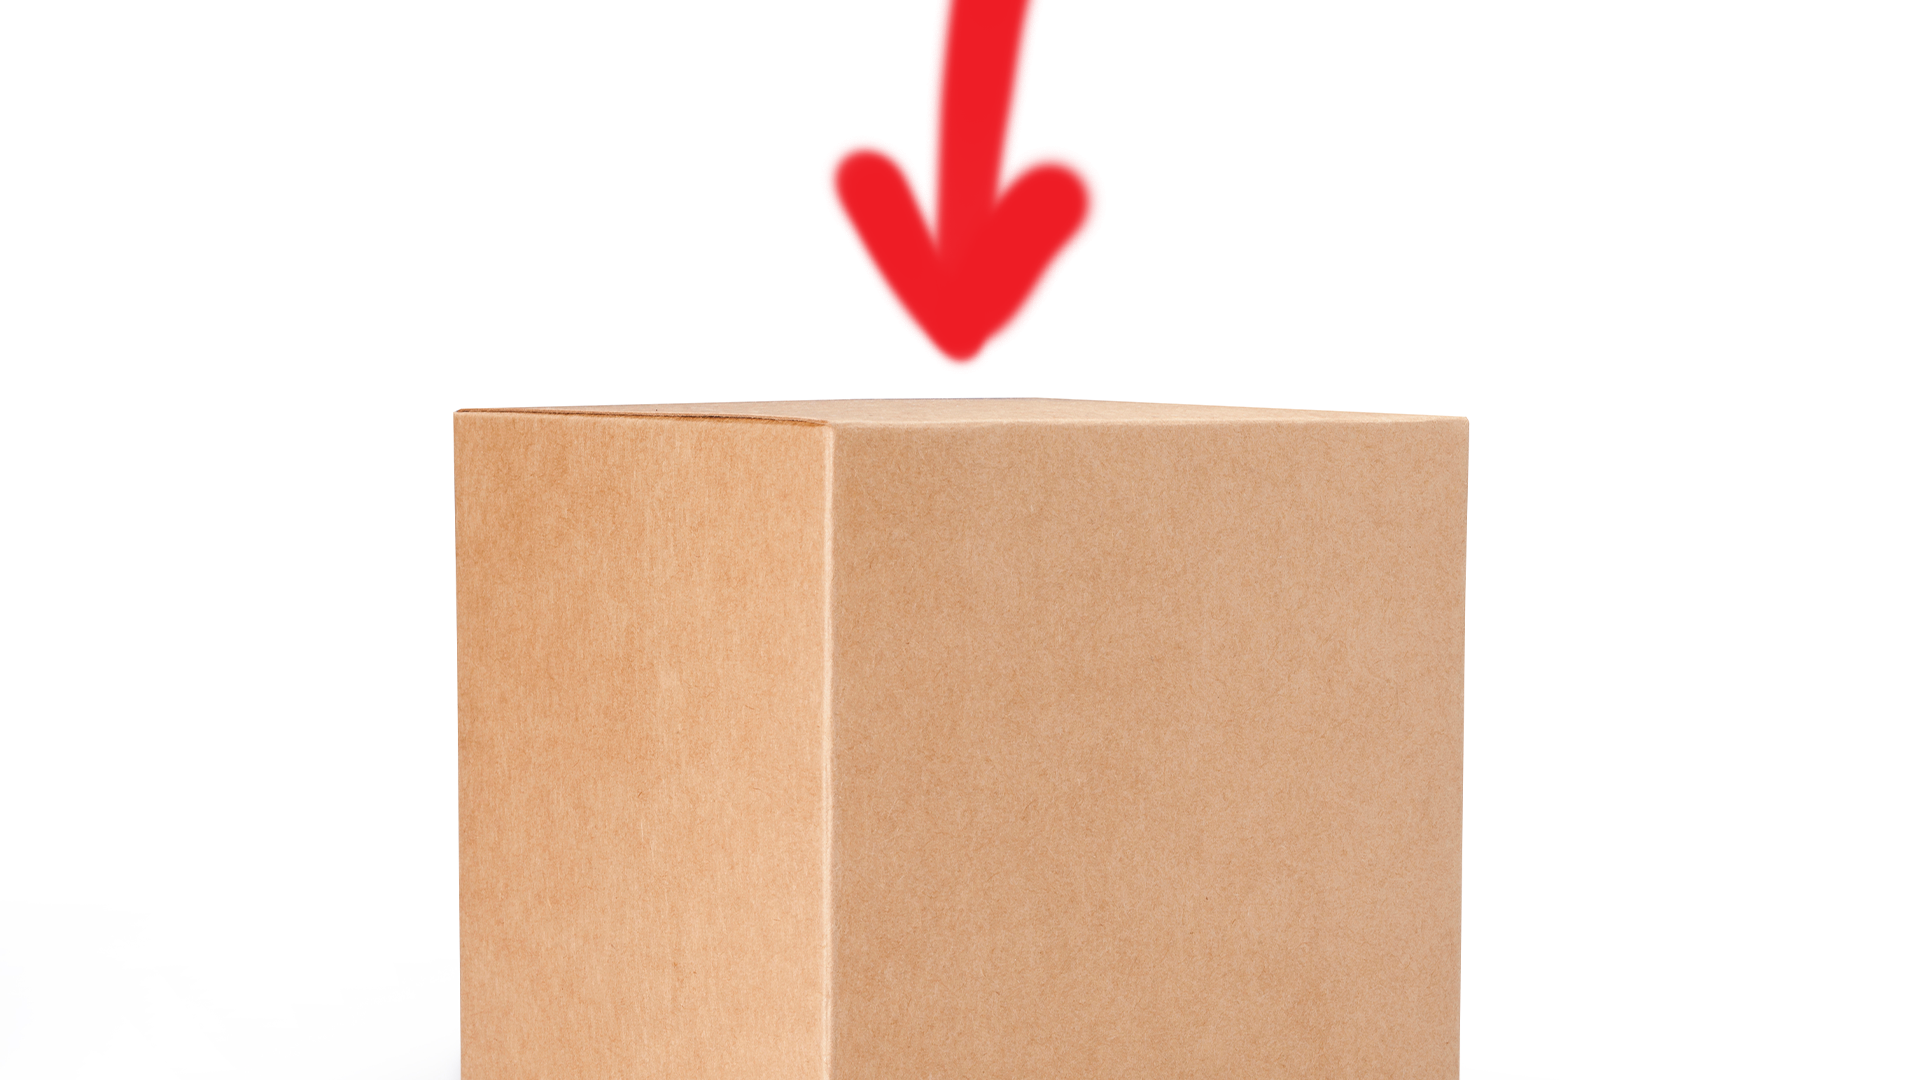 Box on white background with arrow pointing to it